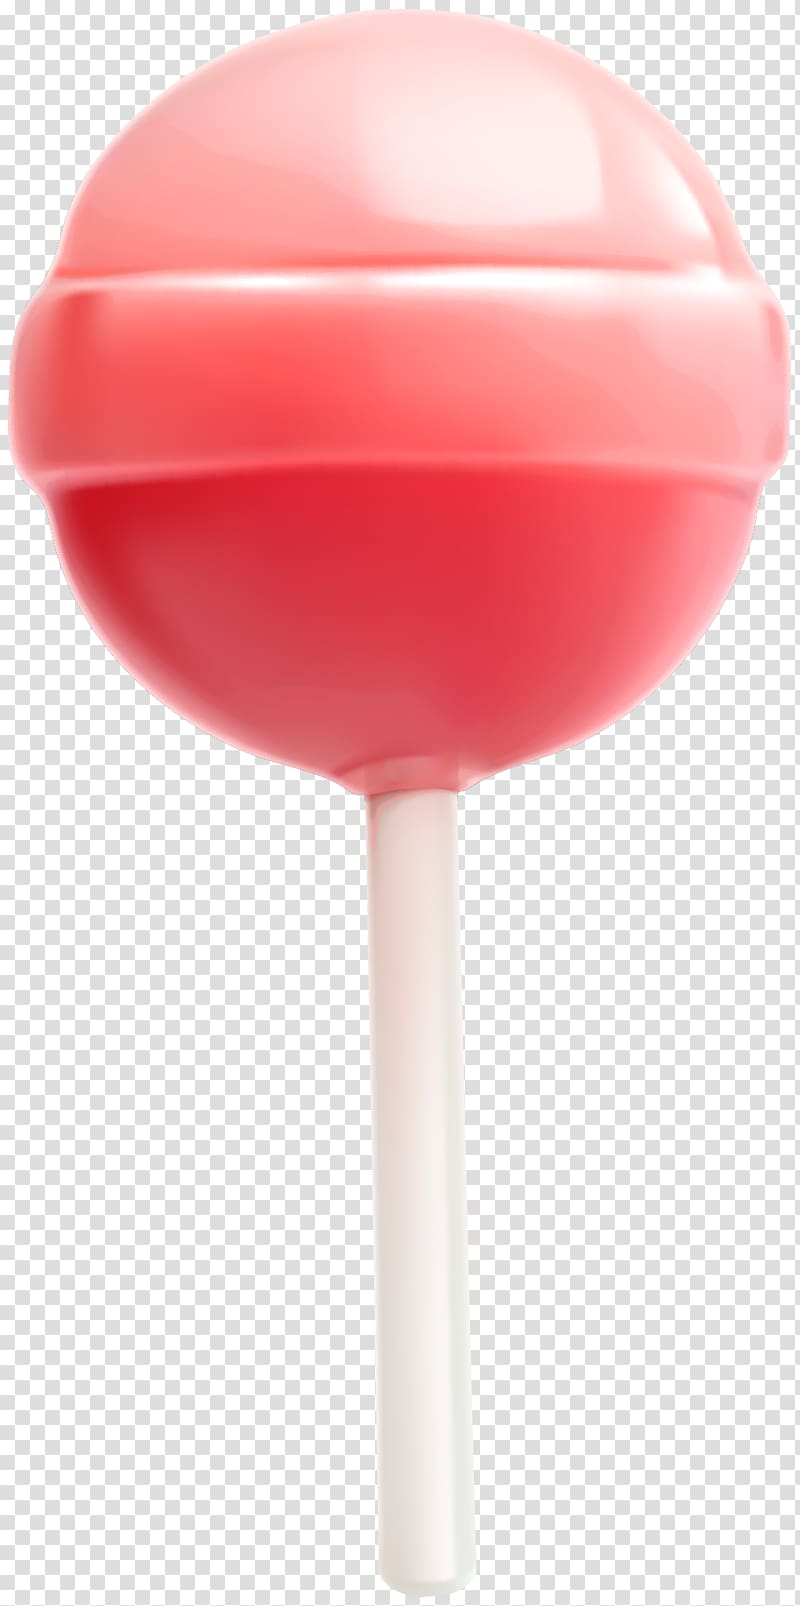 Lollipop Candy Watercolor painting Food, Hand painted red lollipop transparent background PNG clipart